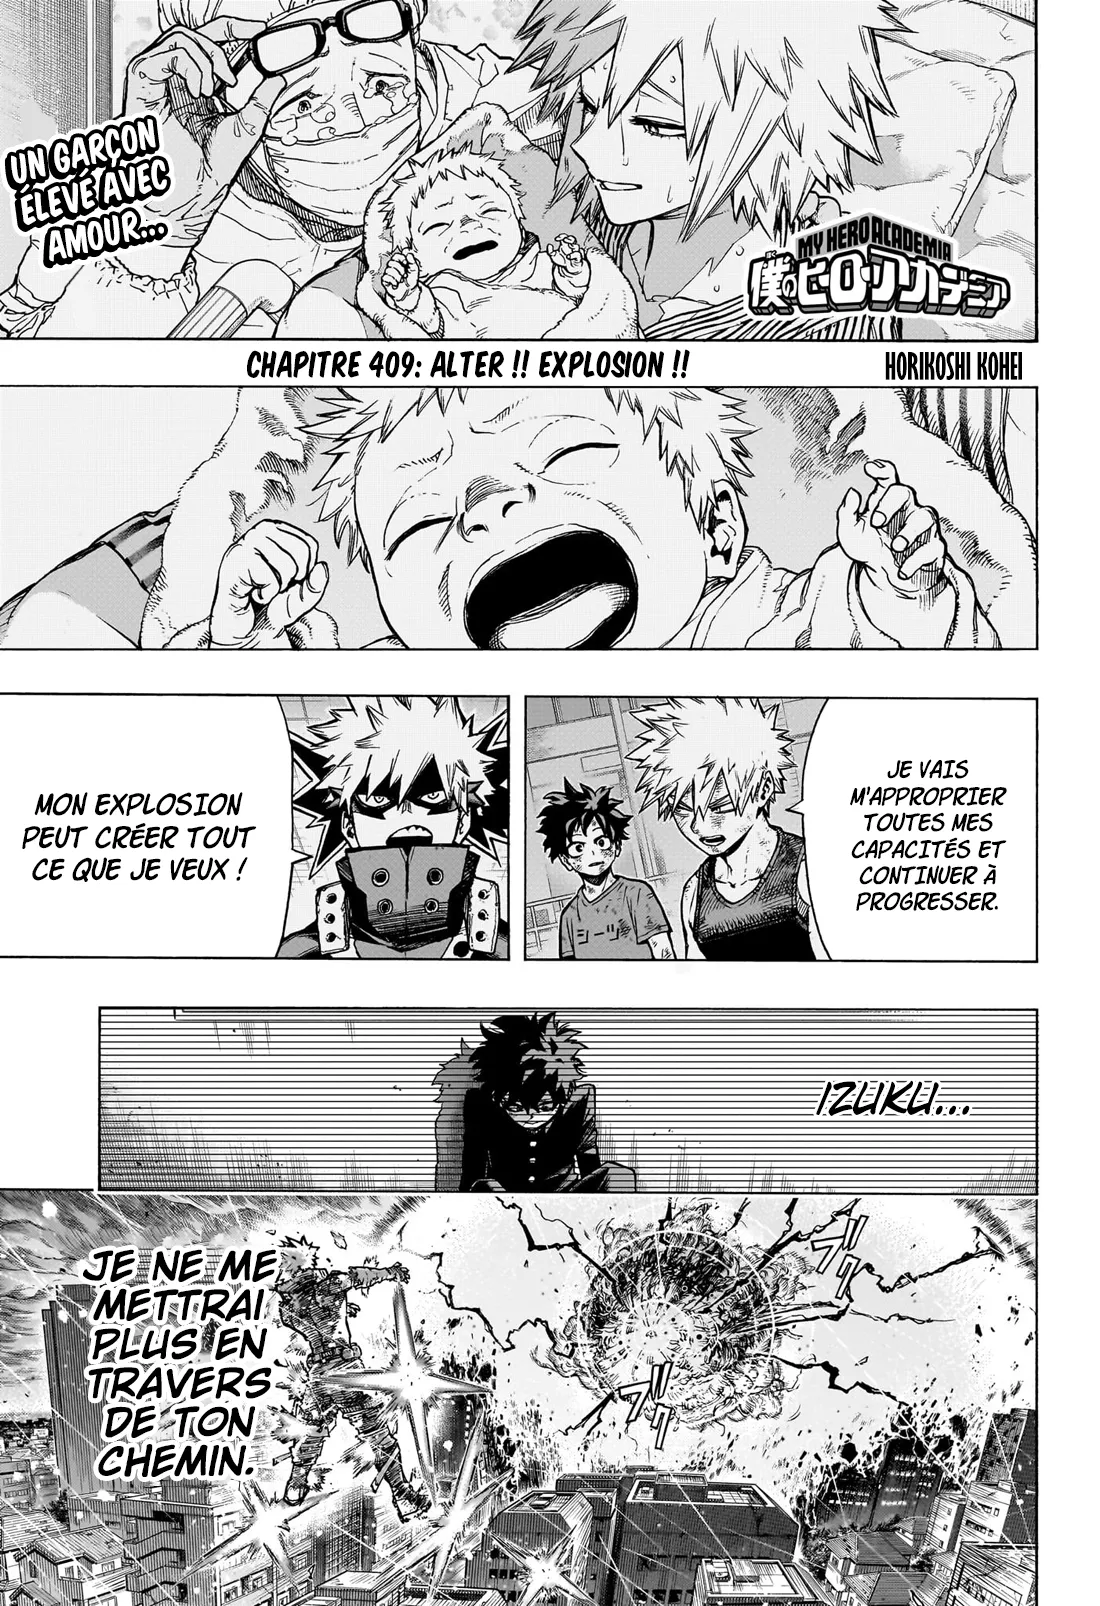 My Hero Academia: Chapter chapitre-409 - Page 1